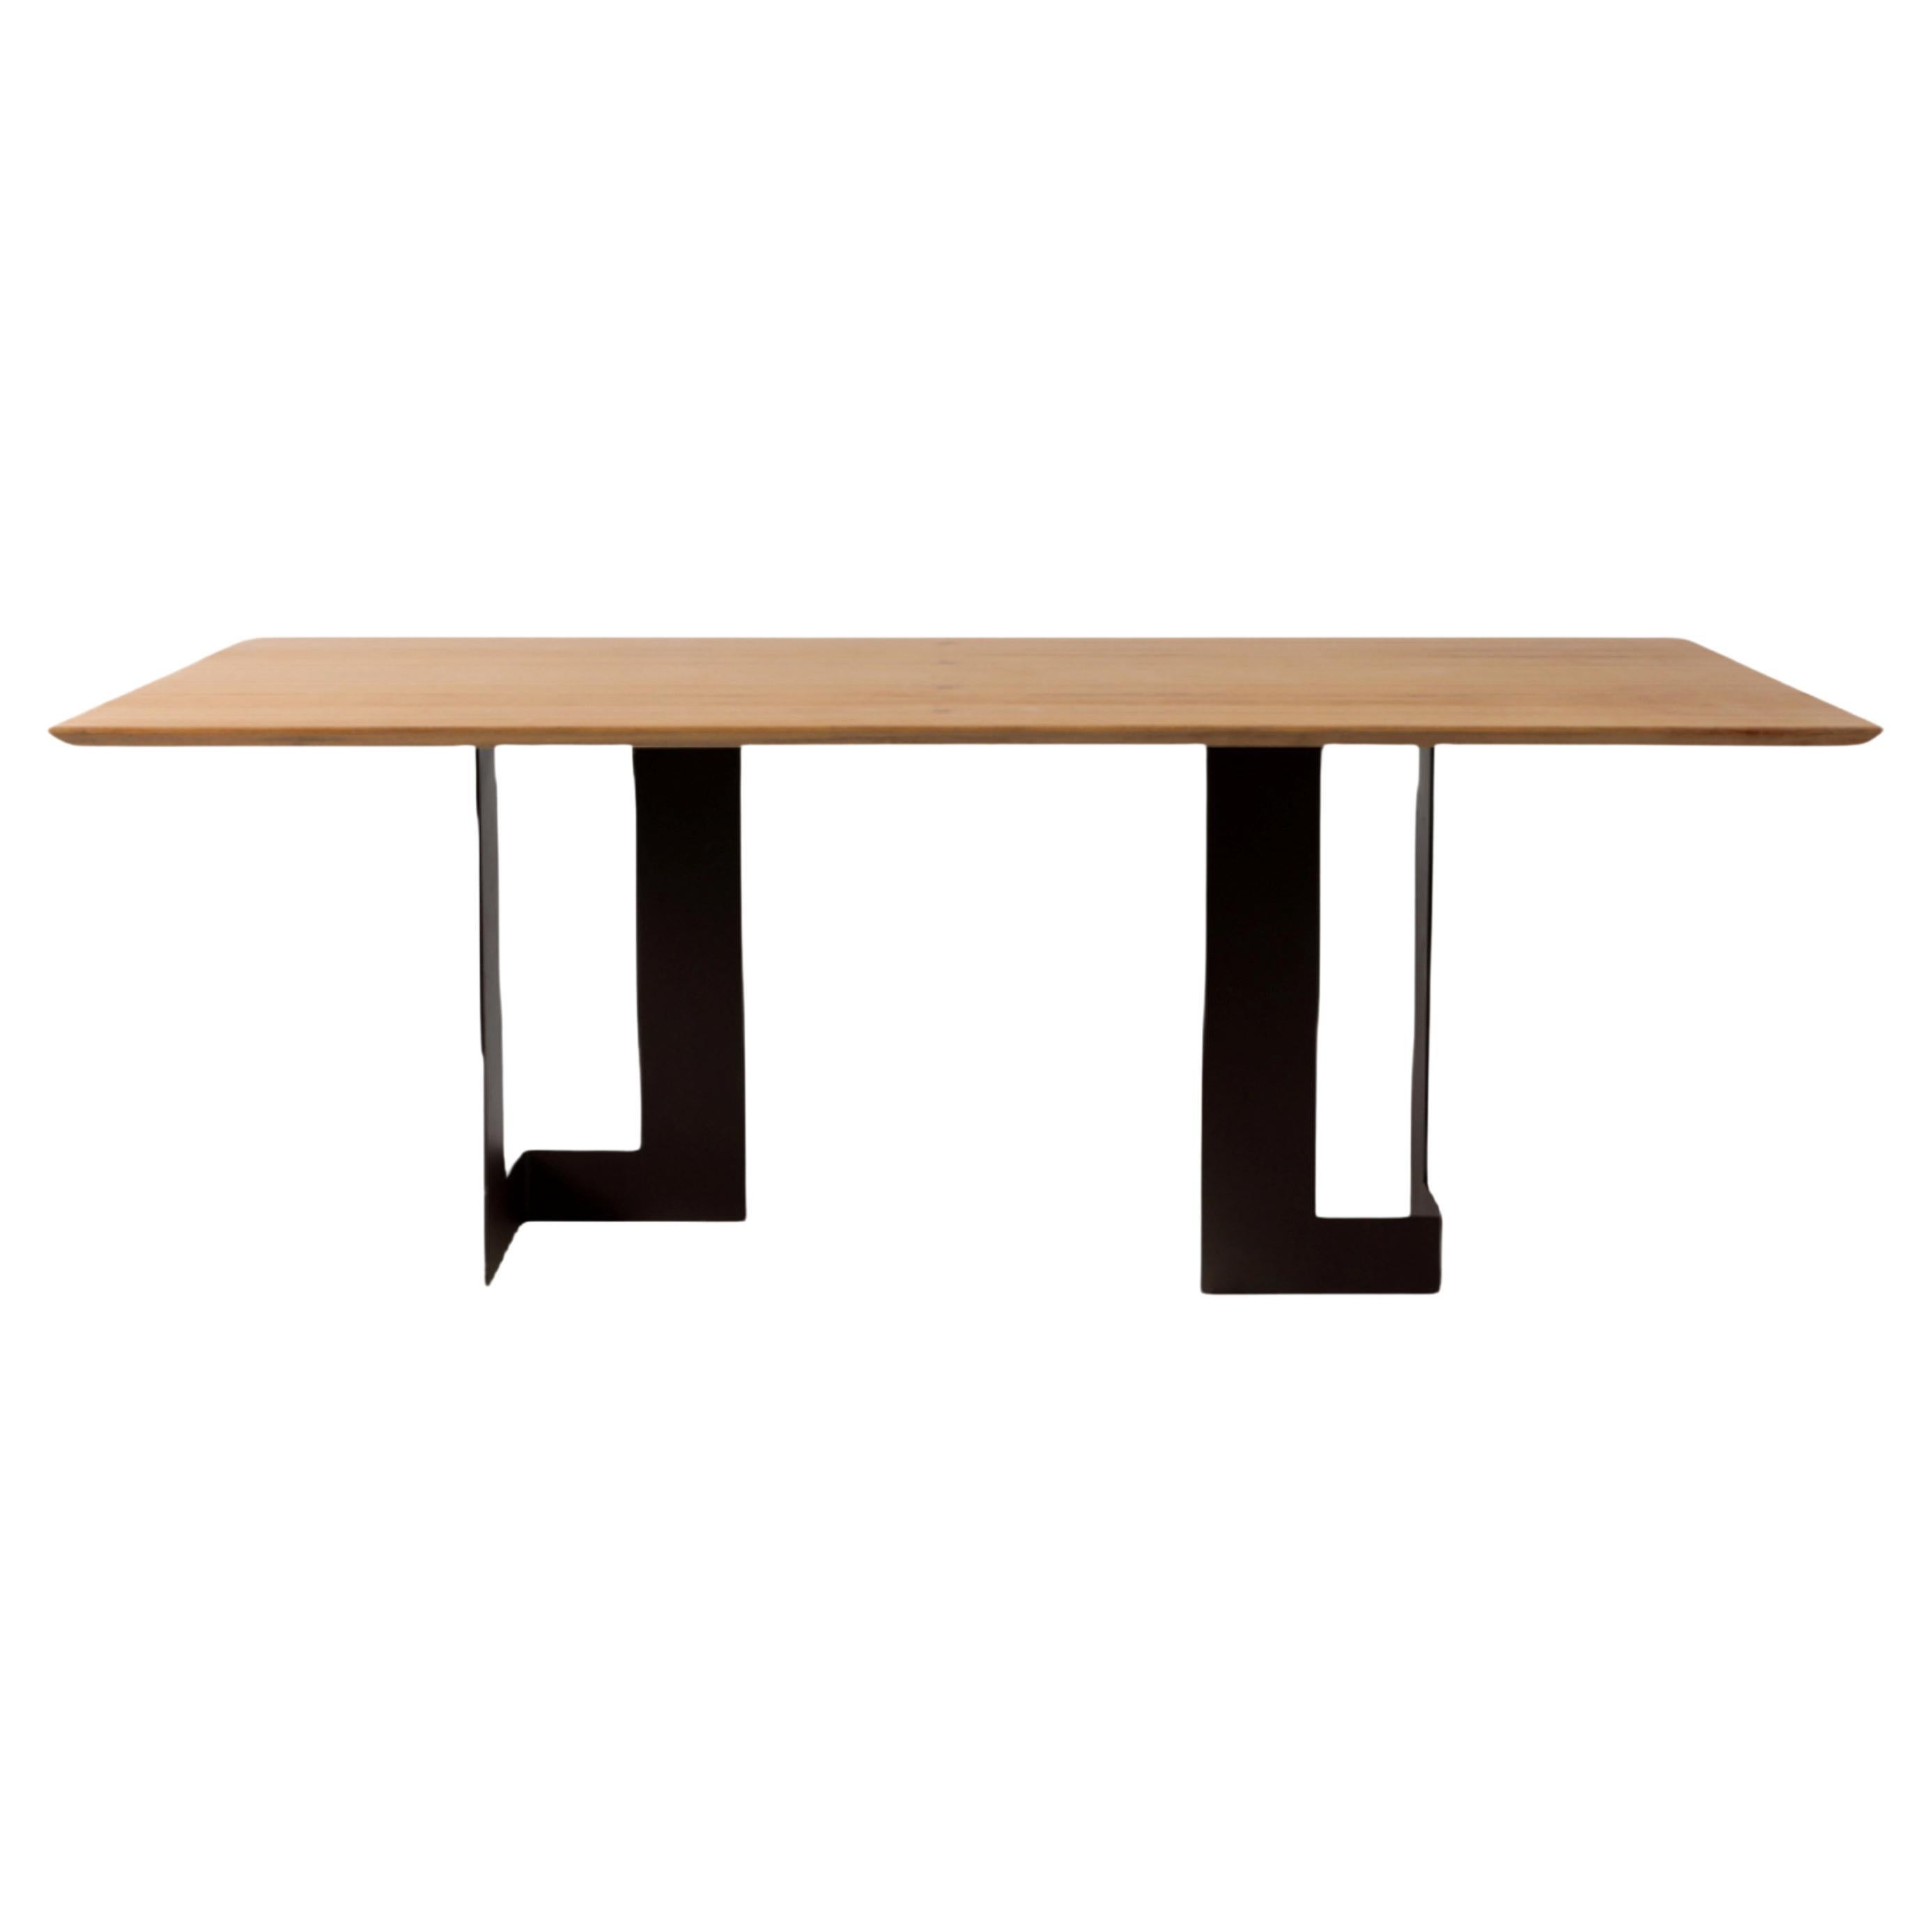 Minimalist-style "Planos" dining table in solid wood and painted steel